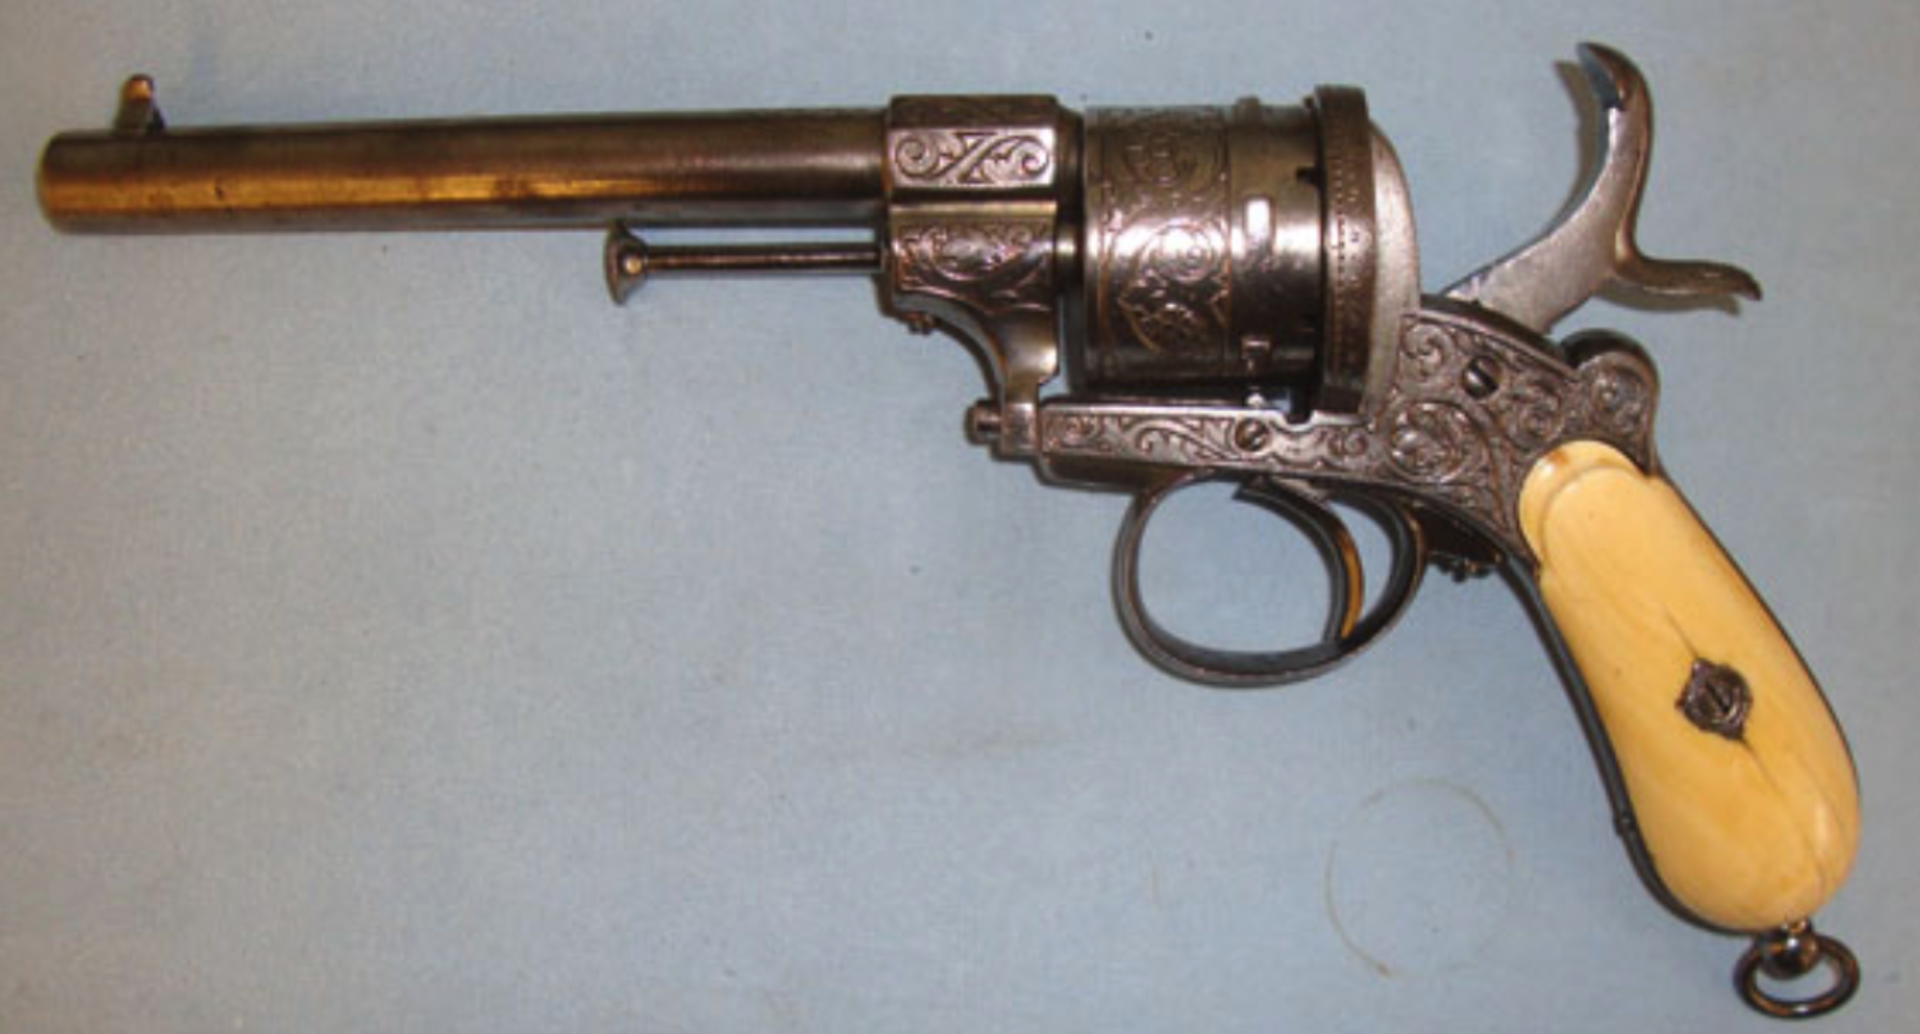 C1870, Continental Military 12mm Calibre Pinfire 6 Shot Revolver With Antique Grips - Image 2 of 3